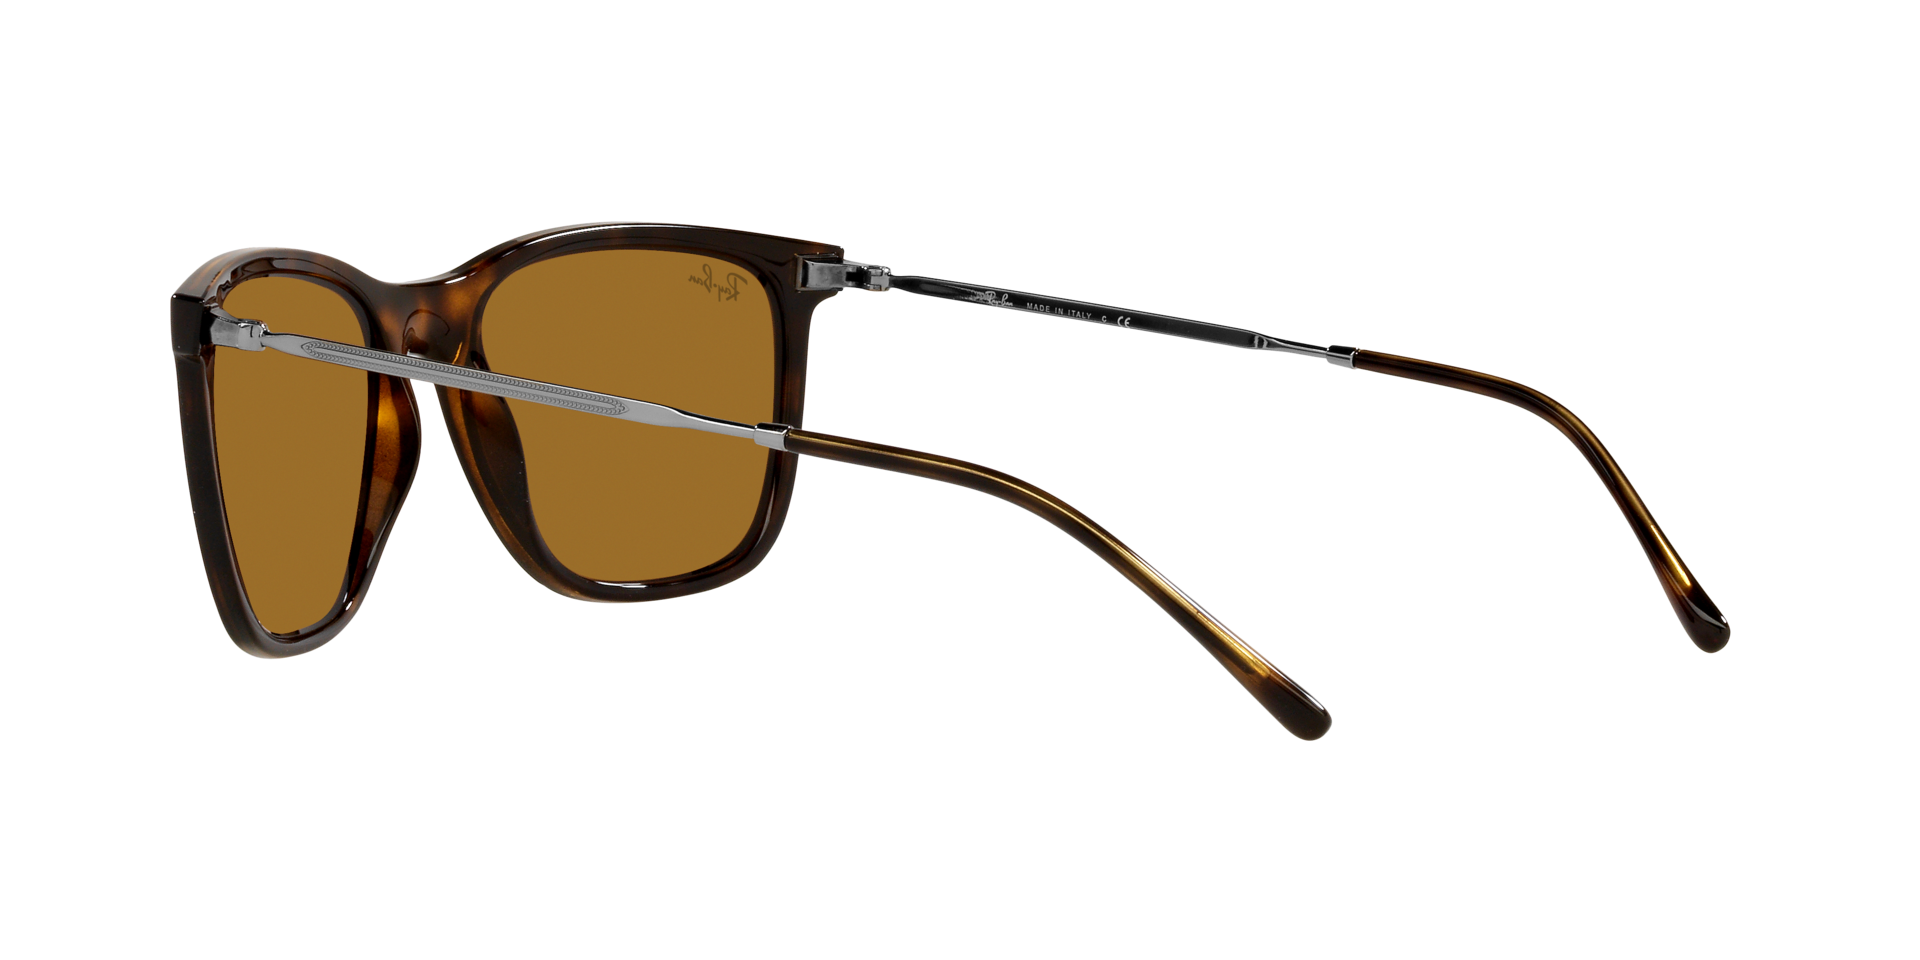 Buy Ray-Ban Rb4344 Sunglasses Online.